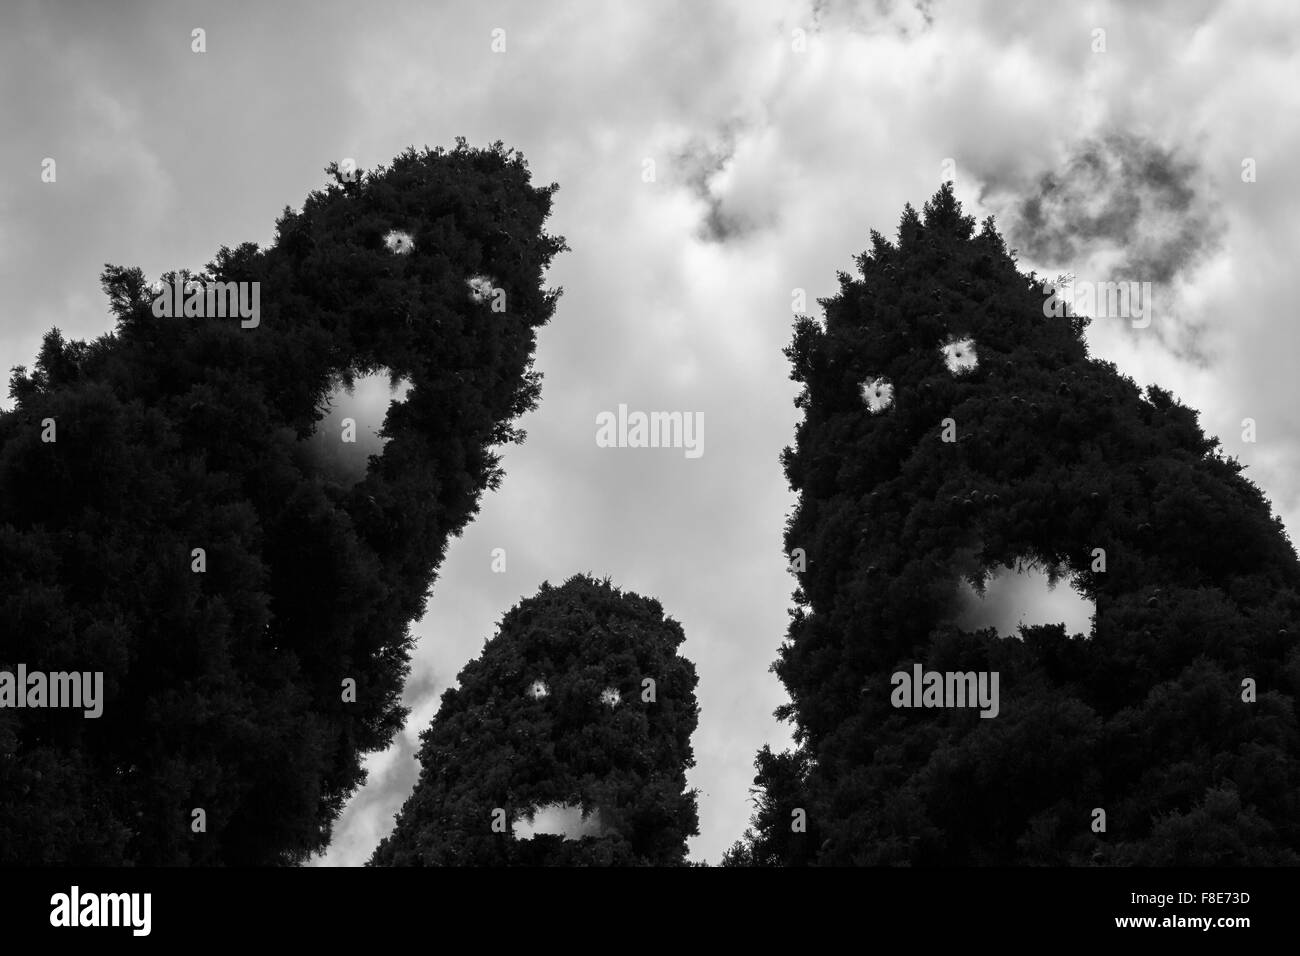 Dead Trees And Shadow Of An Evil Face In Inverted Color Effect. Black And  White Image. Concept Of Friday The 13th, Halloween, Mystery, Nightmare,  Etc. Stock Photo, Picture and Royalty Free Image.